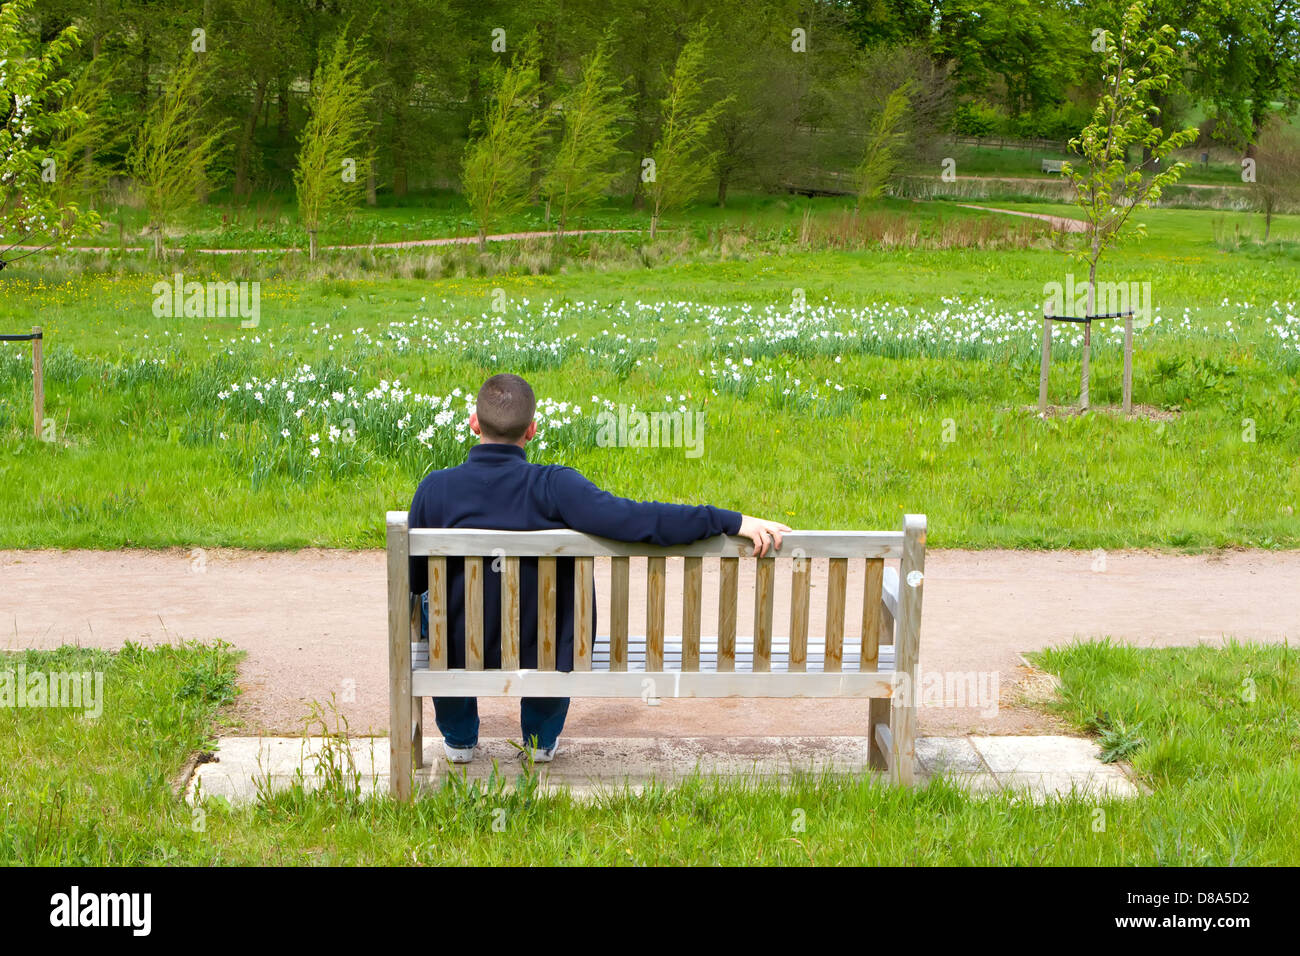 man sitting on a bench in a countryside scene Stock Photo